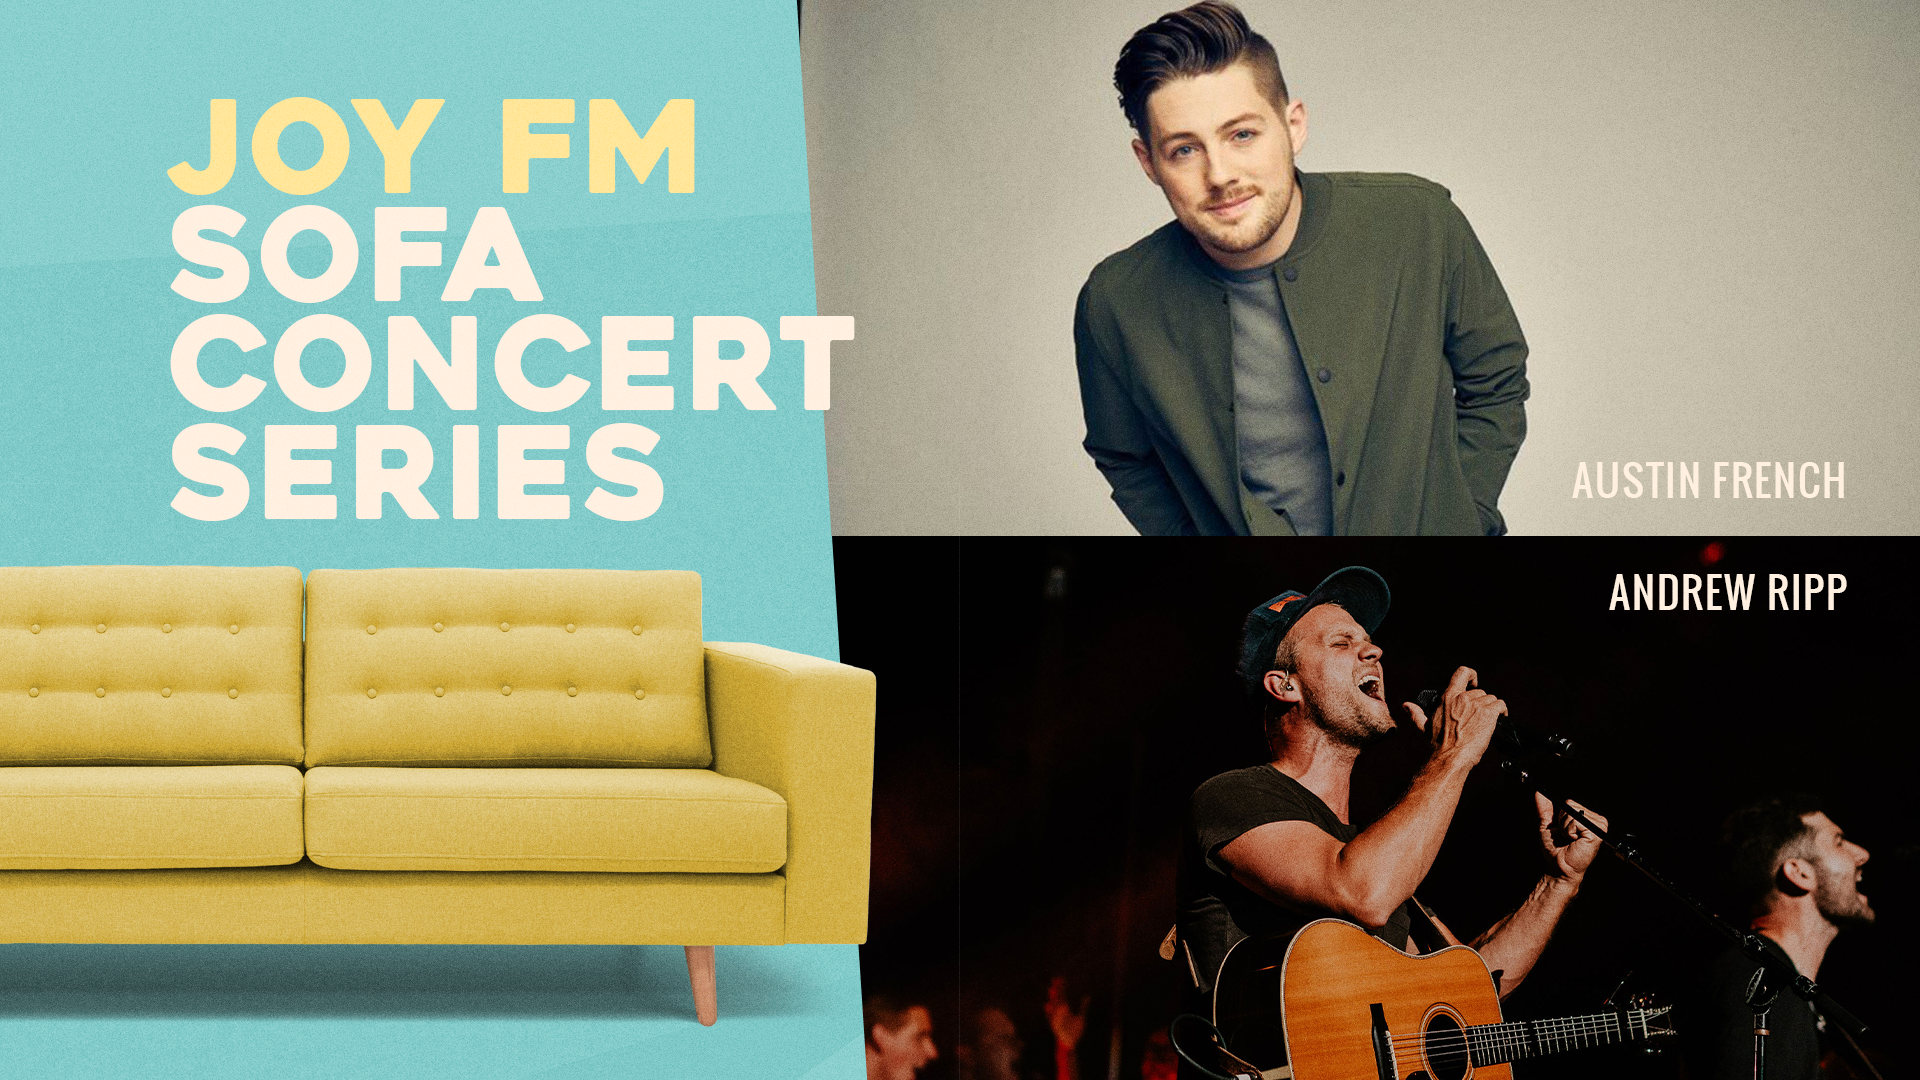 JOY FM Sofa Concert Series with Austin French and Andrew Ripp